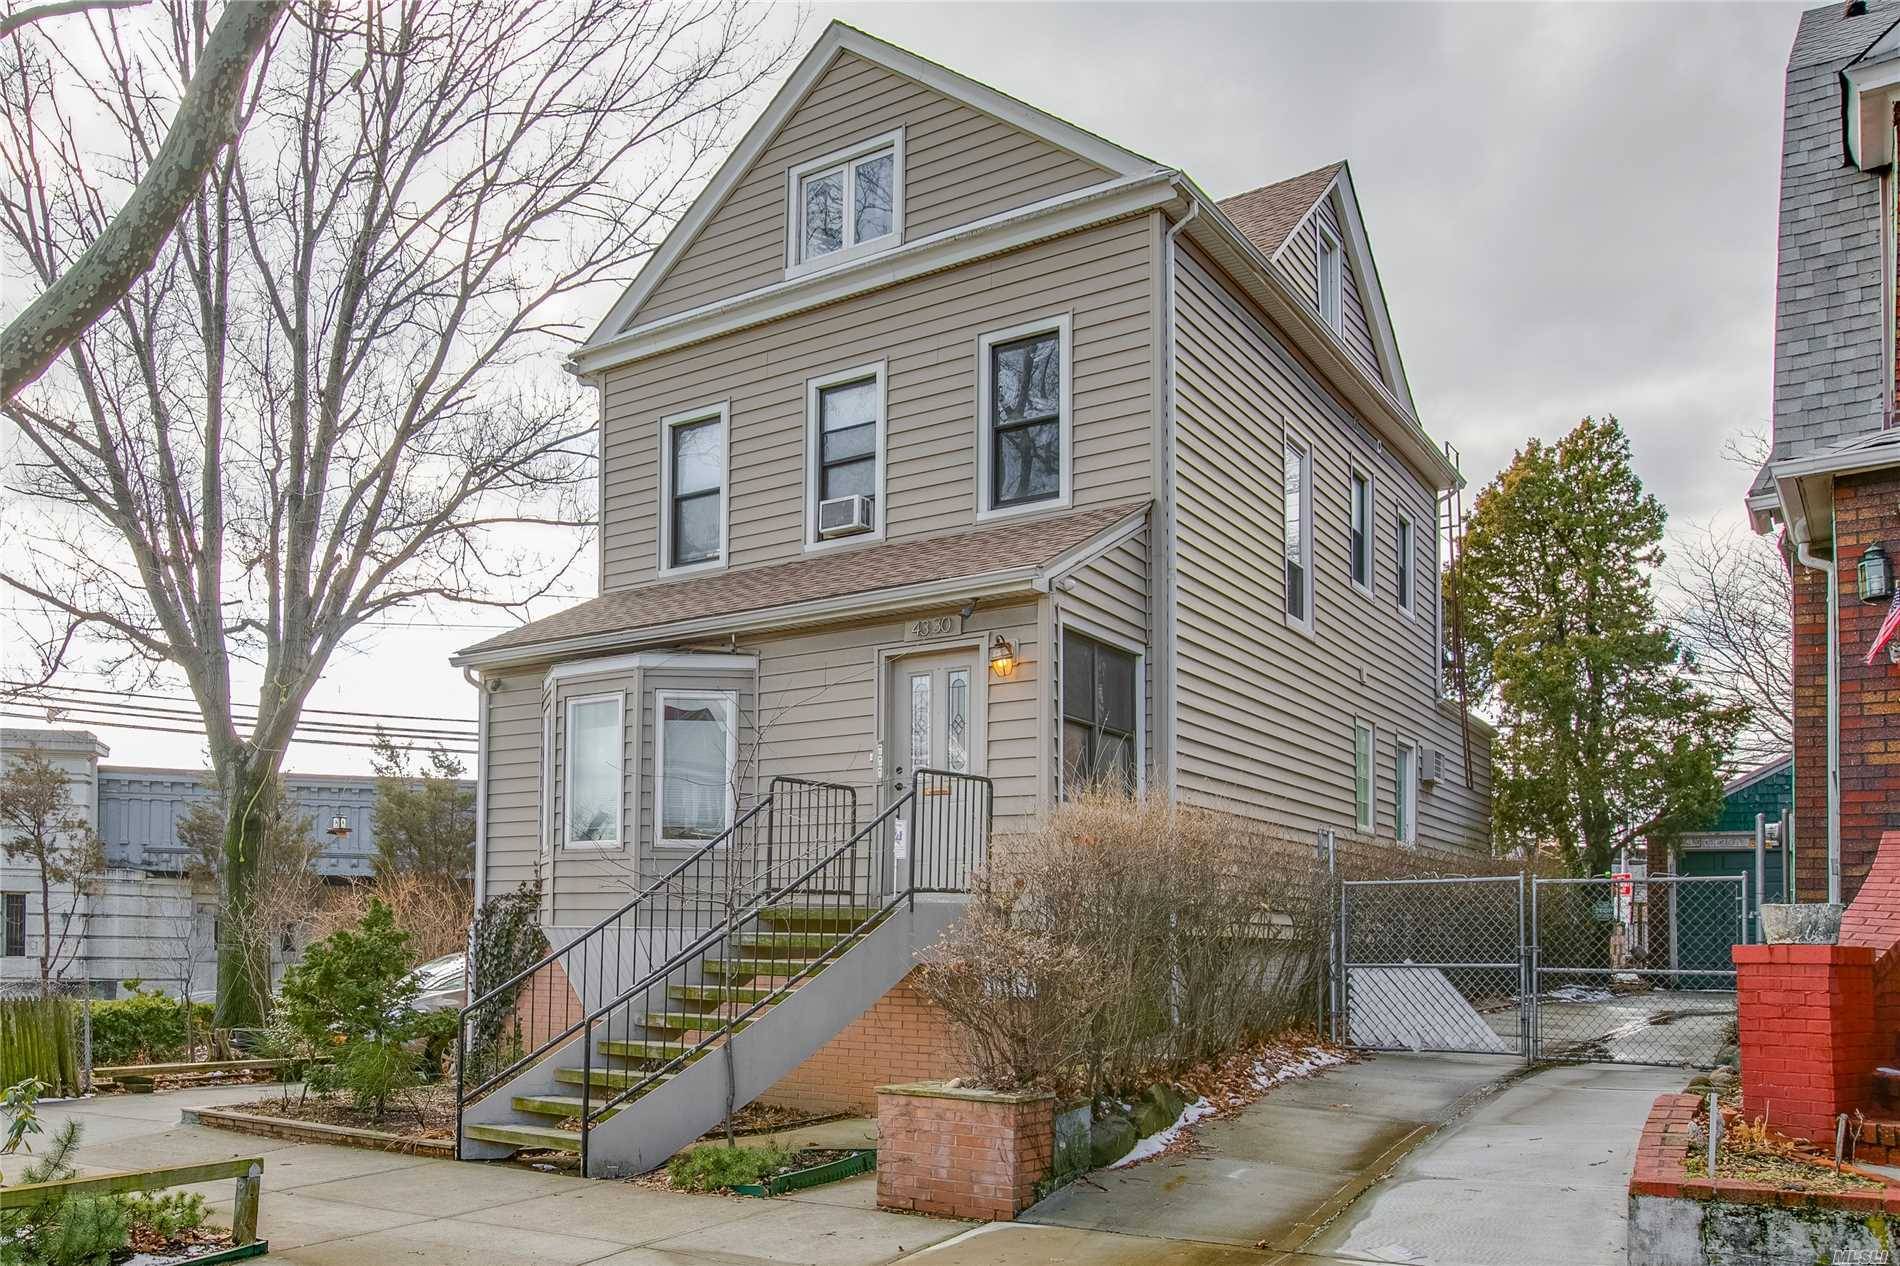 Recently Renovated And Updated This Detached Colonial Has Legal 3 Family Status 3 Separate Apartments, Updated Electric, New Sheetrock Walls And Ceiling, 6 Split Unit Ac, Hardwood Floors Throughout 9 ...